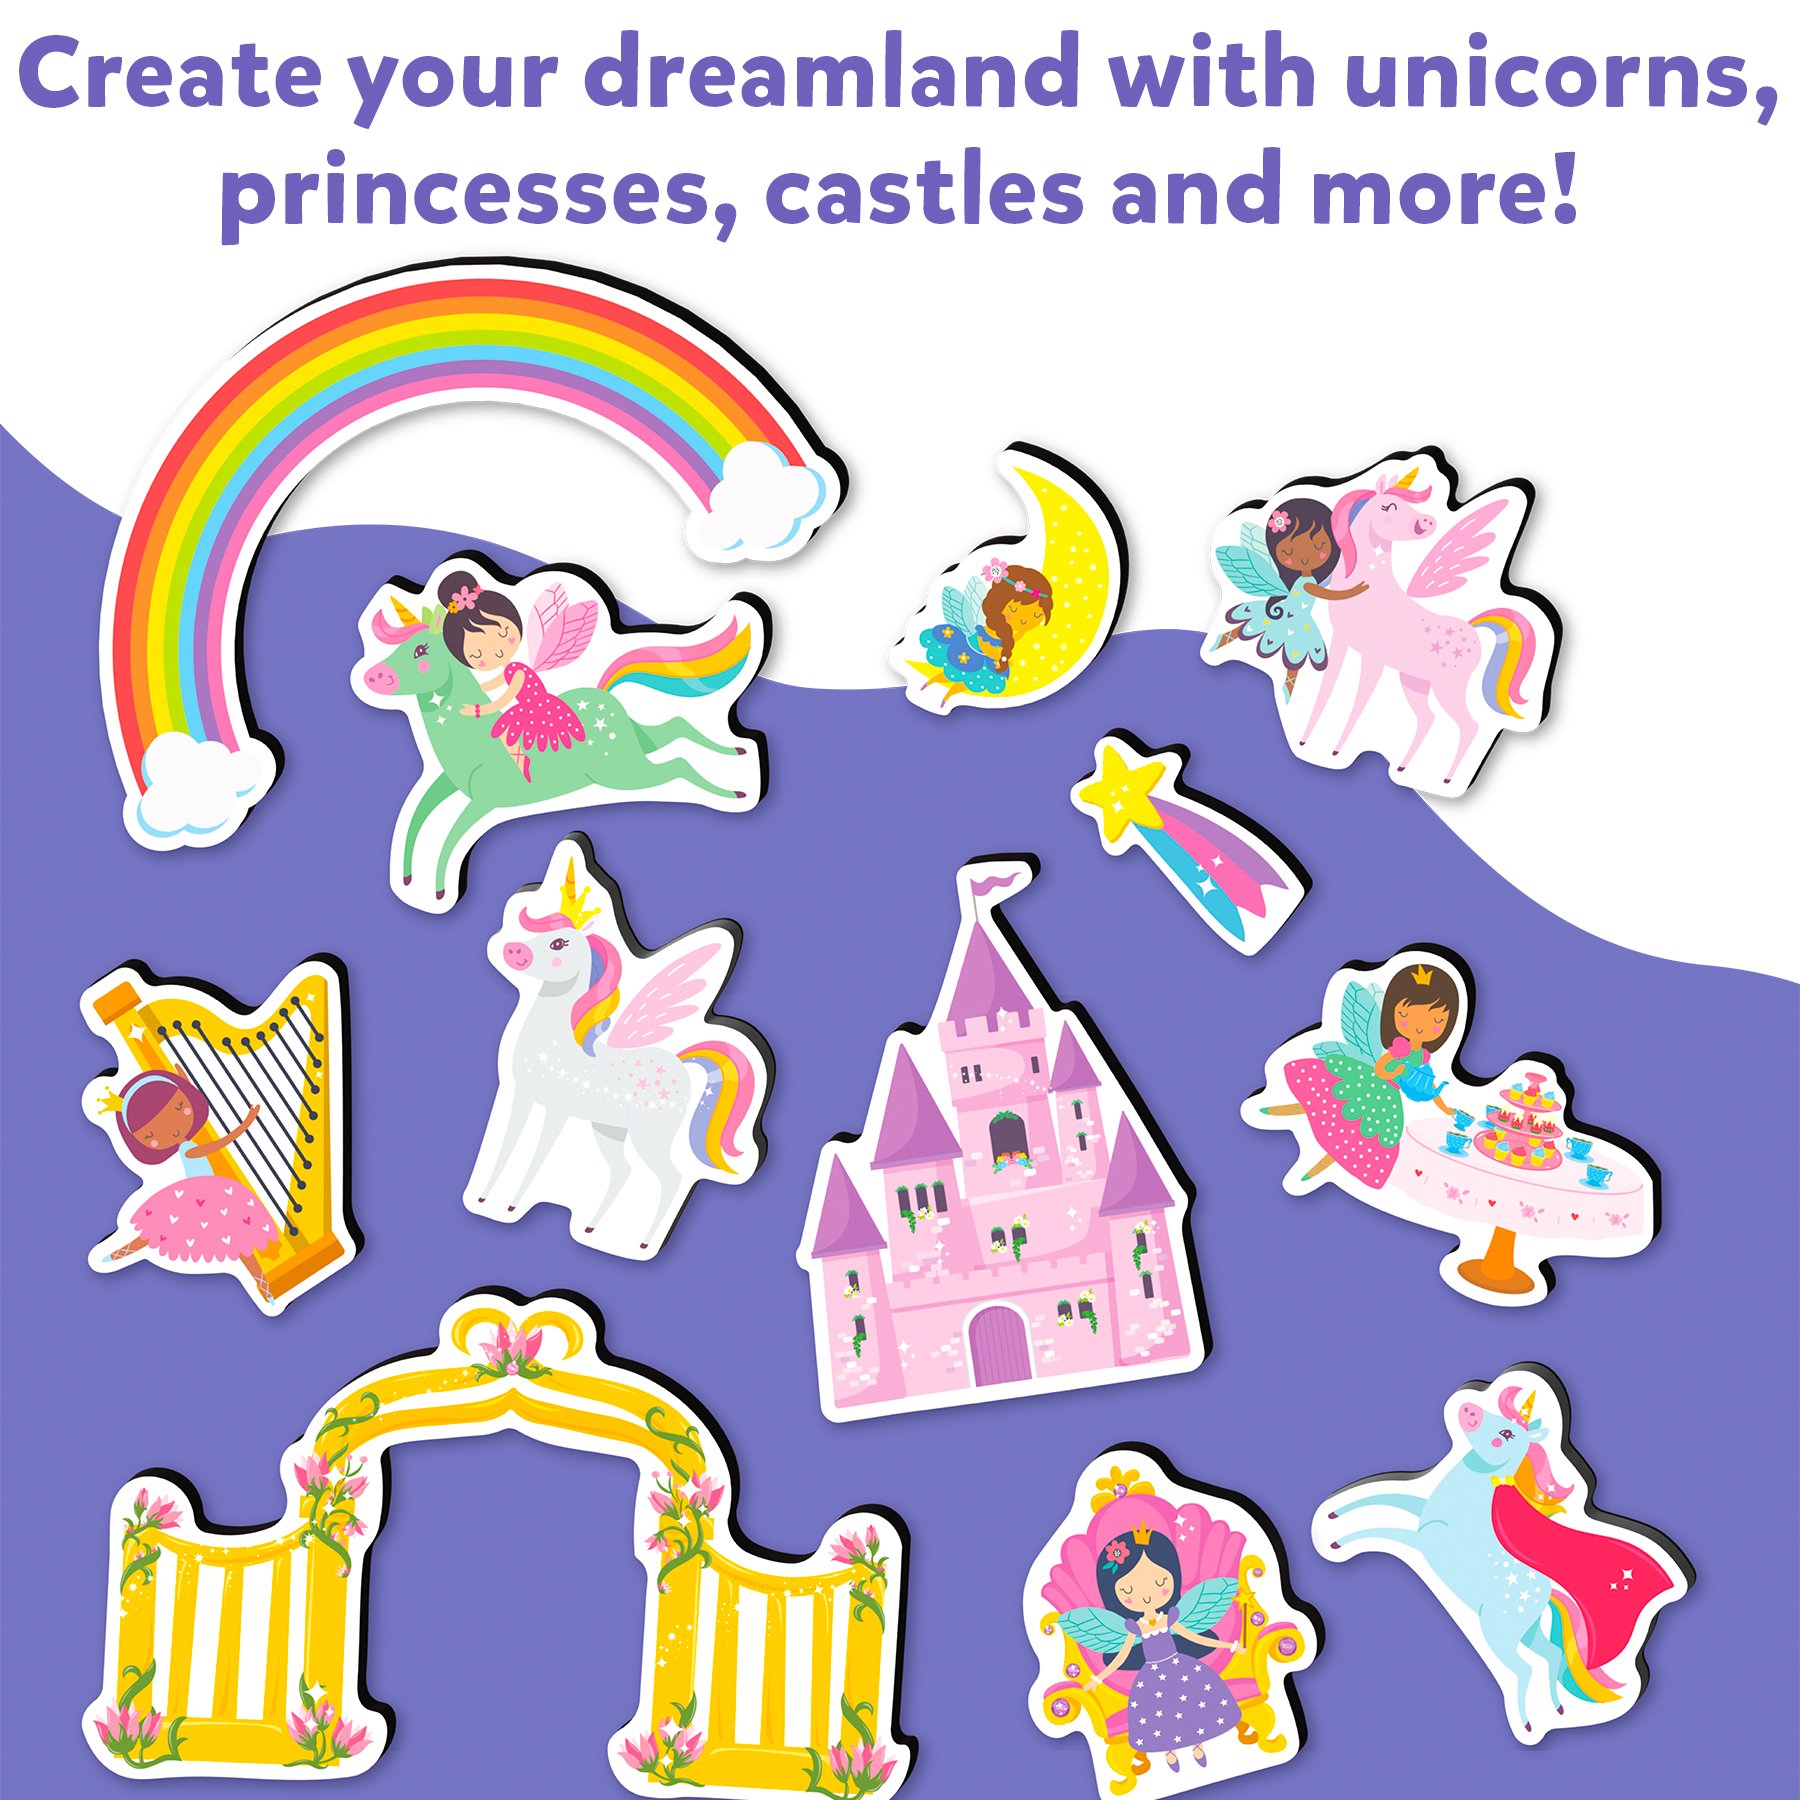 Skillmatics Creative Toy Magnetopia - Princess & Unicorn Land, Interactive Pretend Play Set for Kids, Toddlers, 40+ Magnetic Pieces, Preschool Learning Game, Gifts for Girls & Boys Ages 3, 4, 5, 6, 7